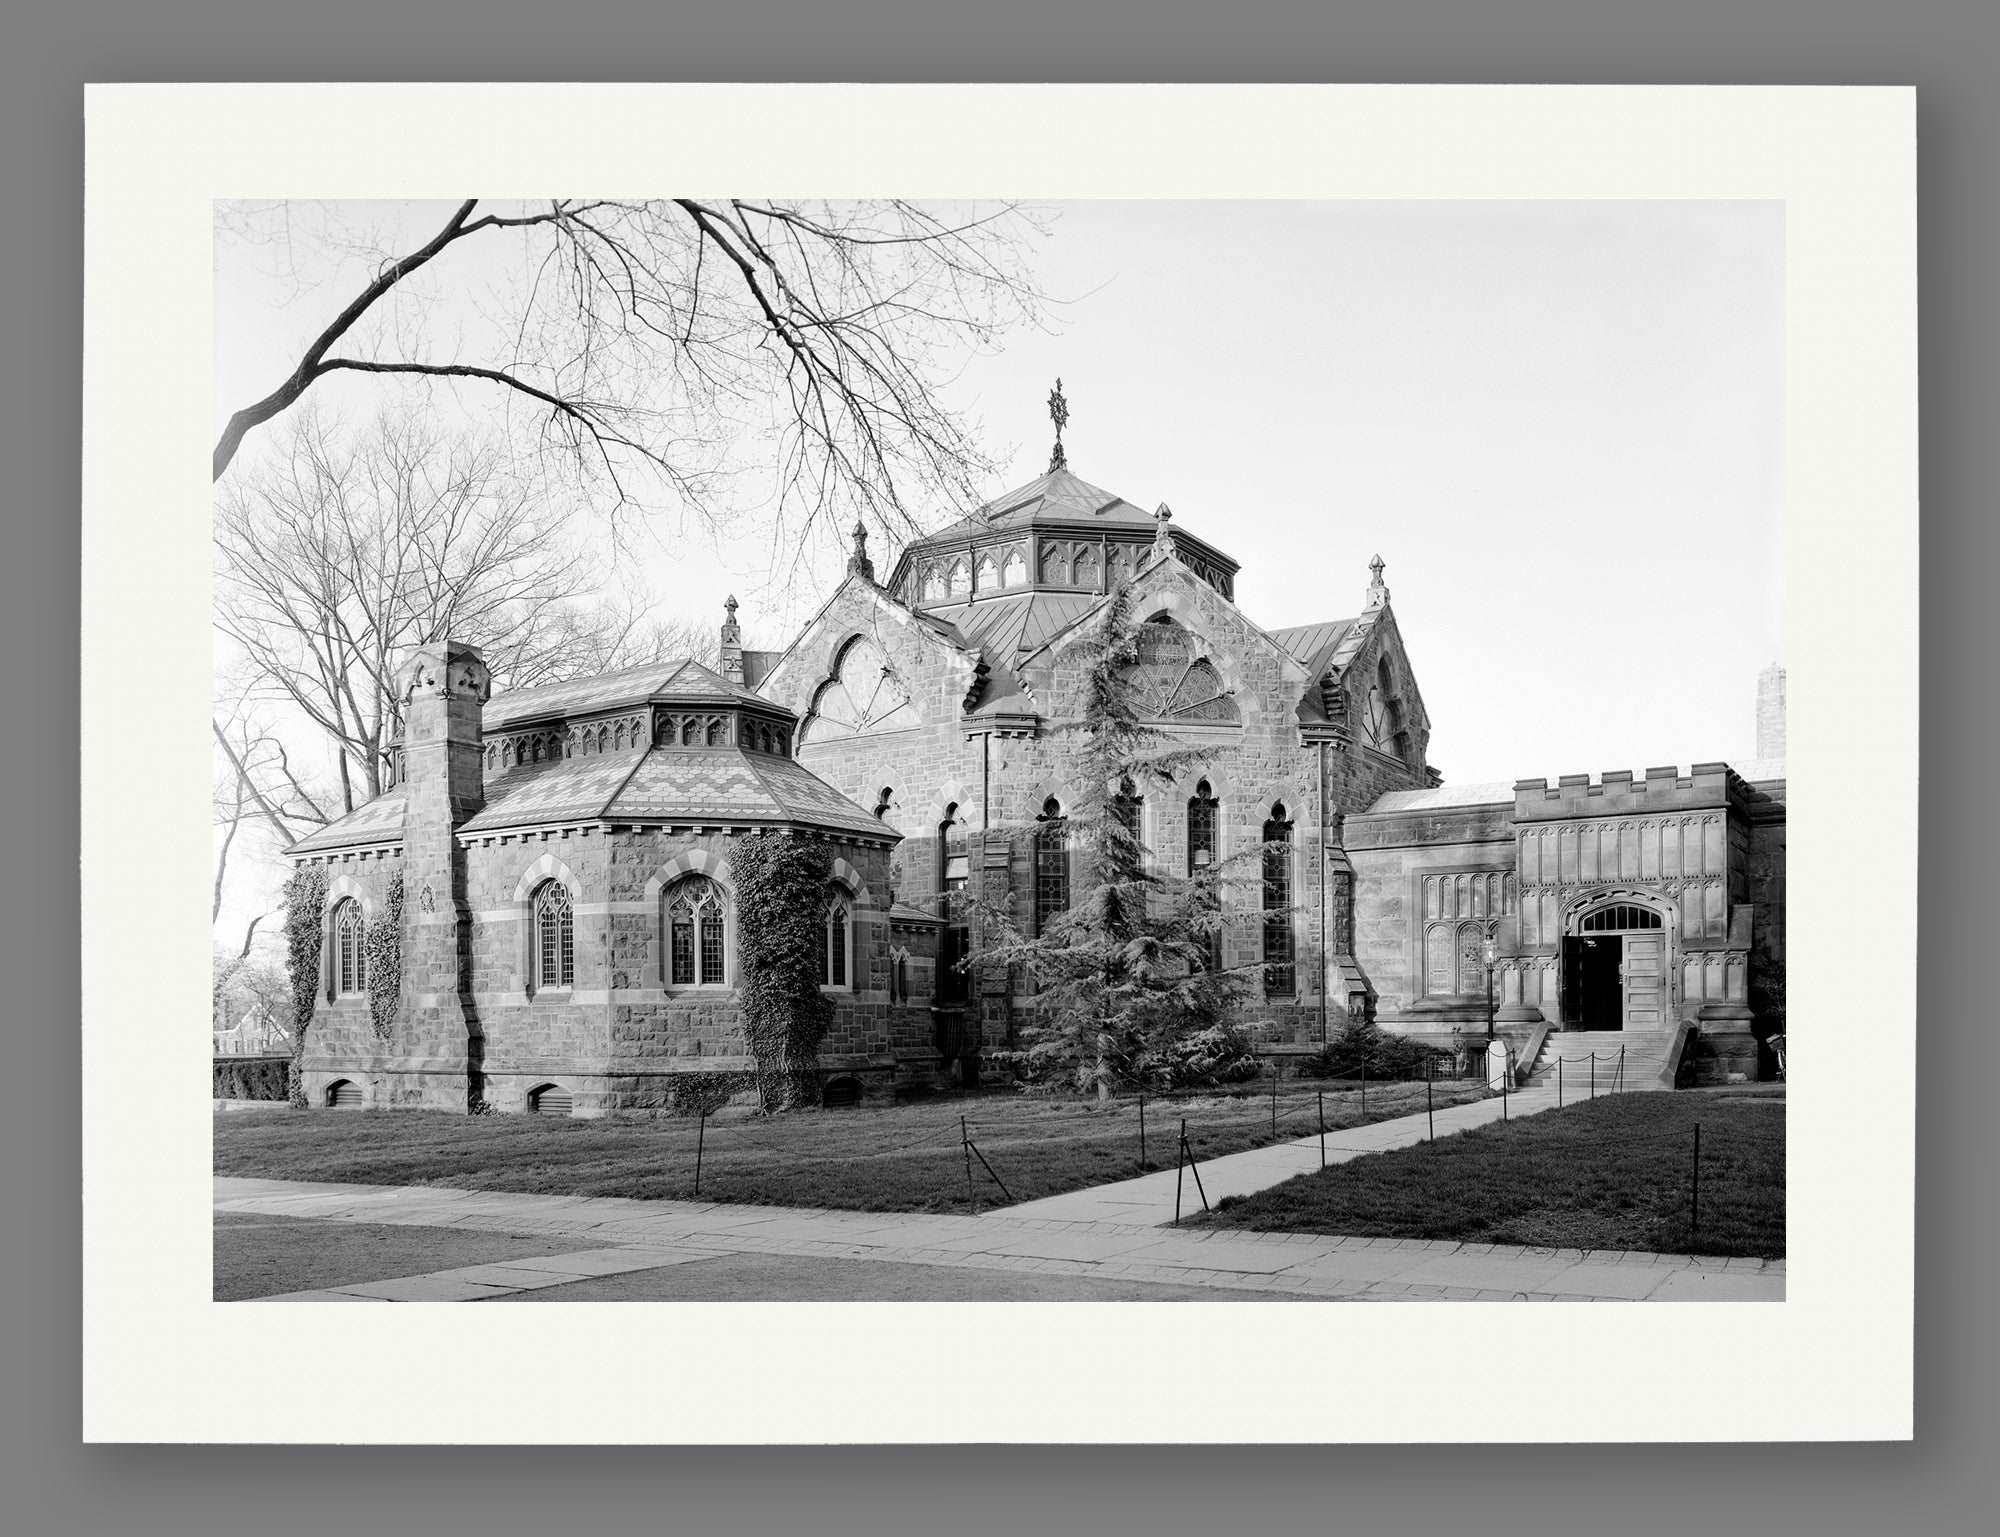 A paper print reproduction of a black and white photograph of Princeton University